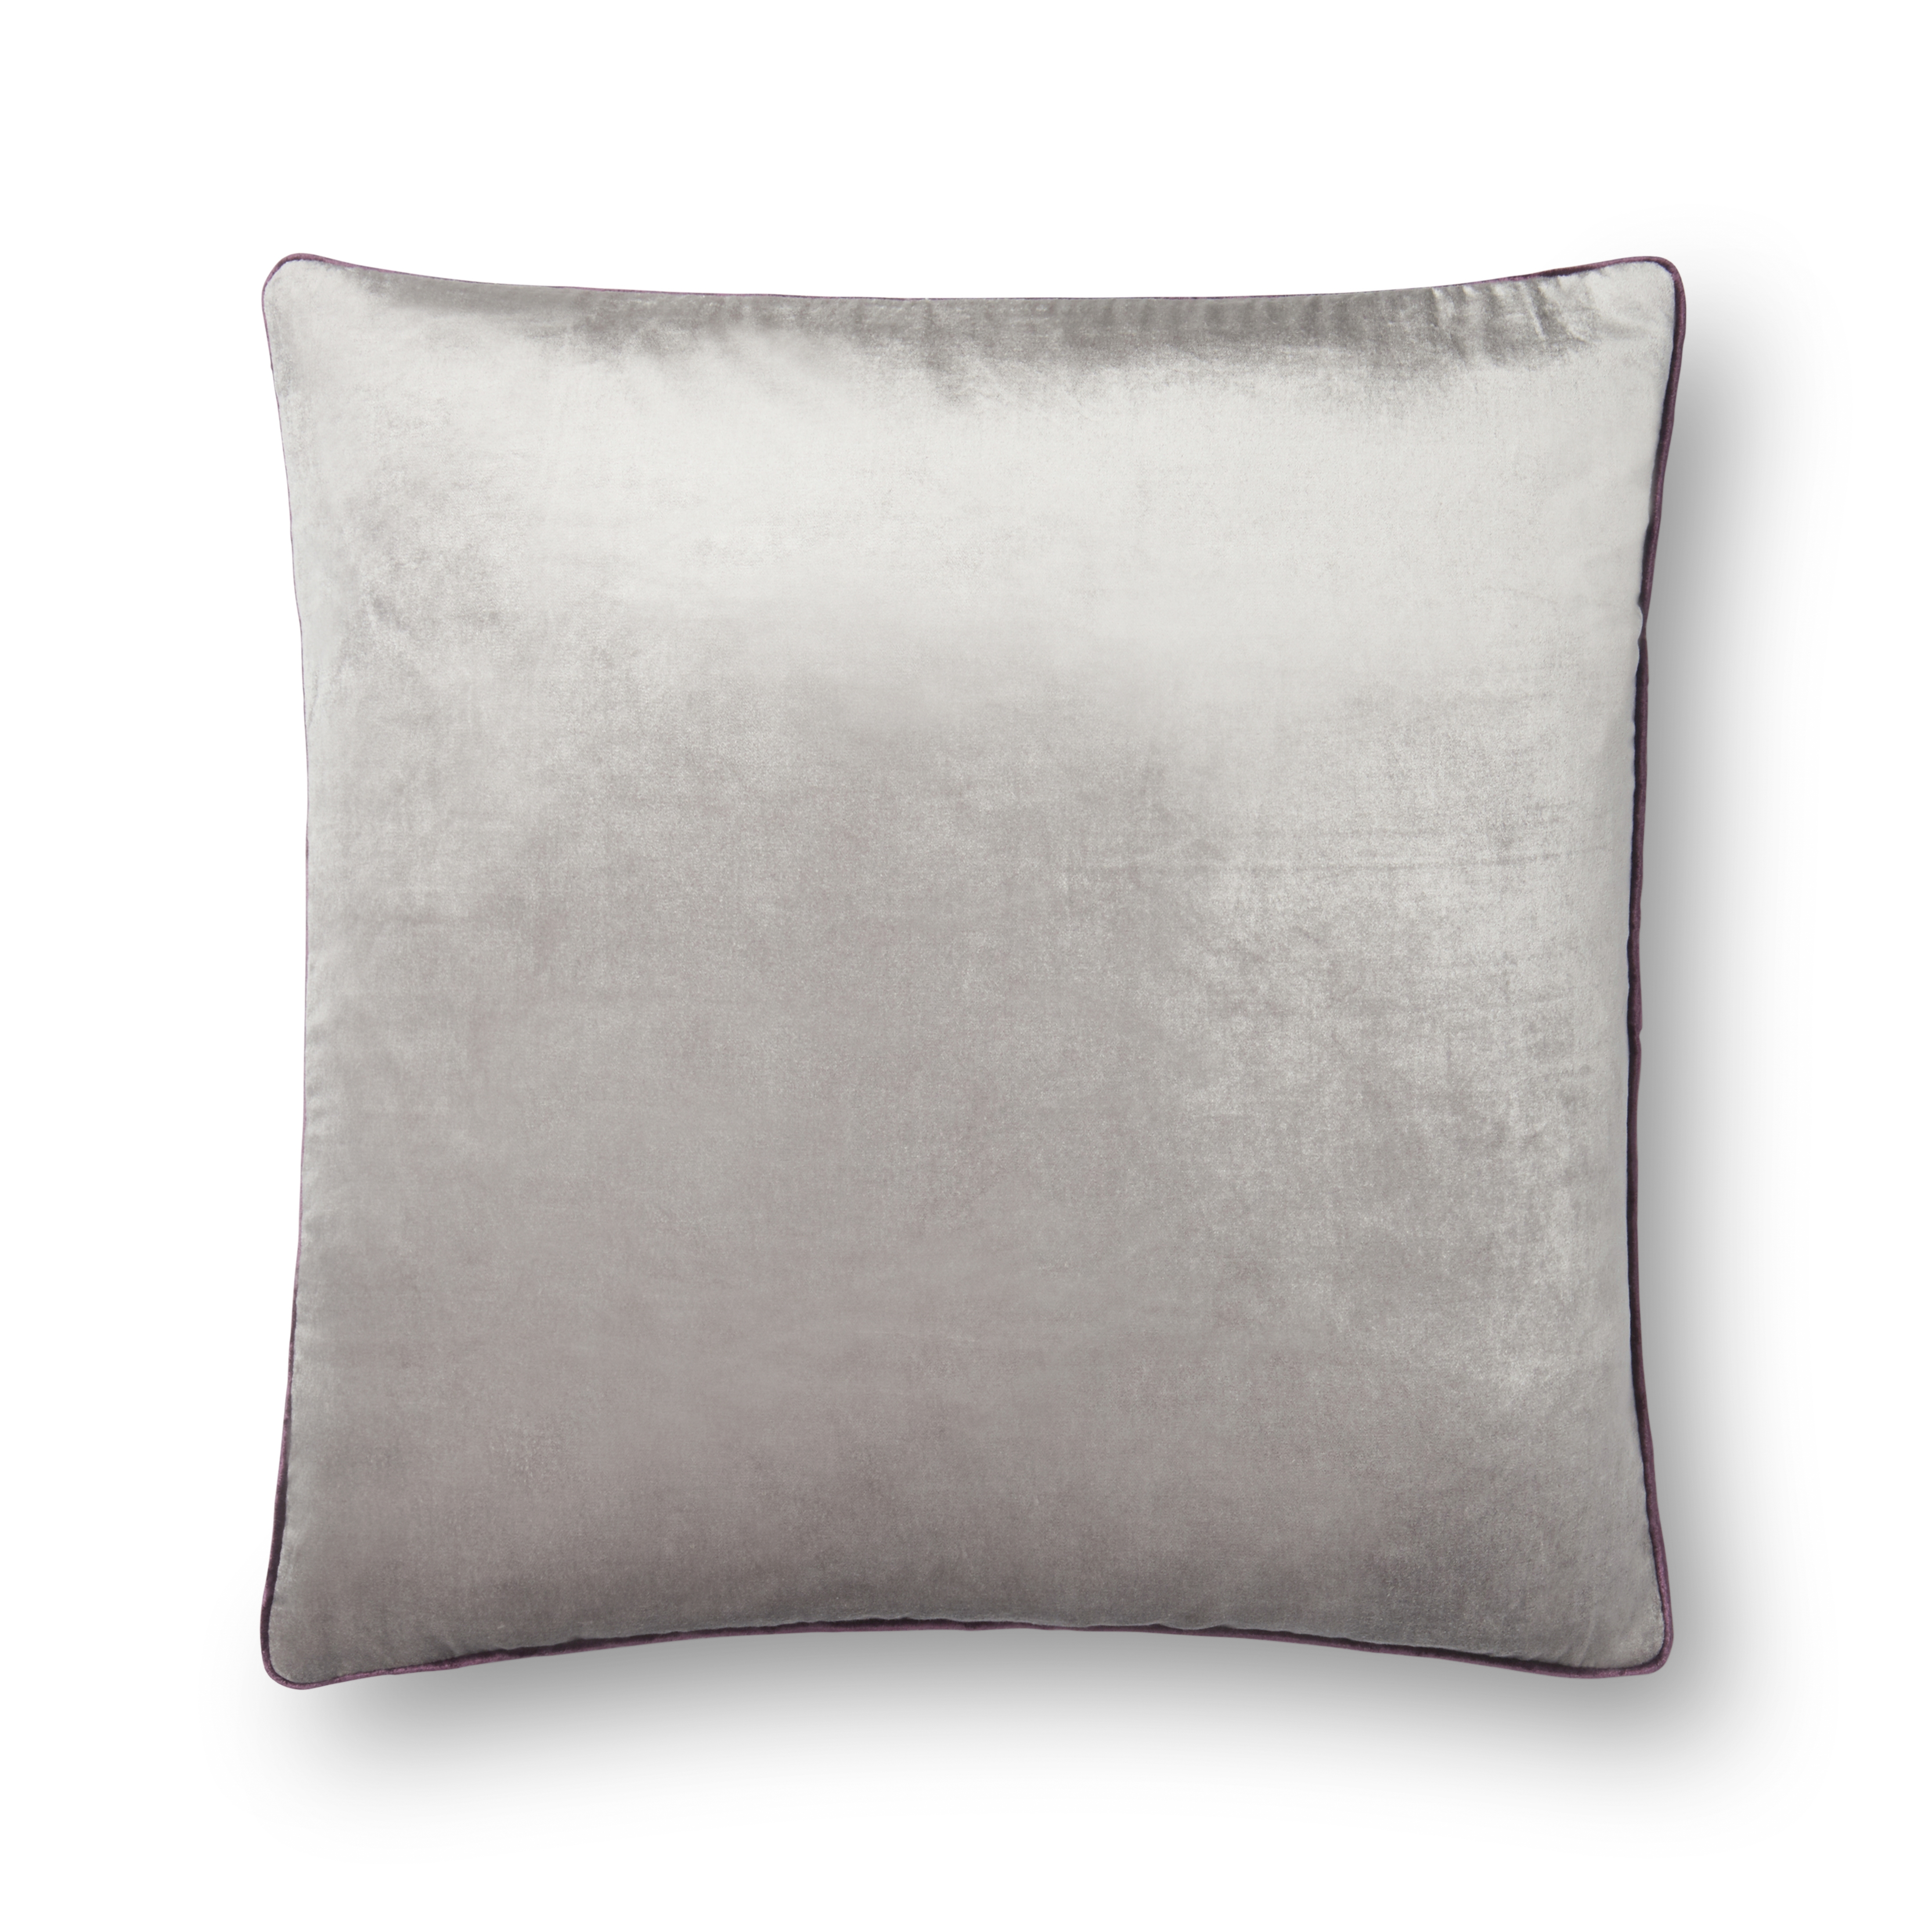 Loloi Pillows P0602 Grey 22" x 22" Cover Only - Image 0